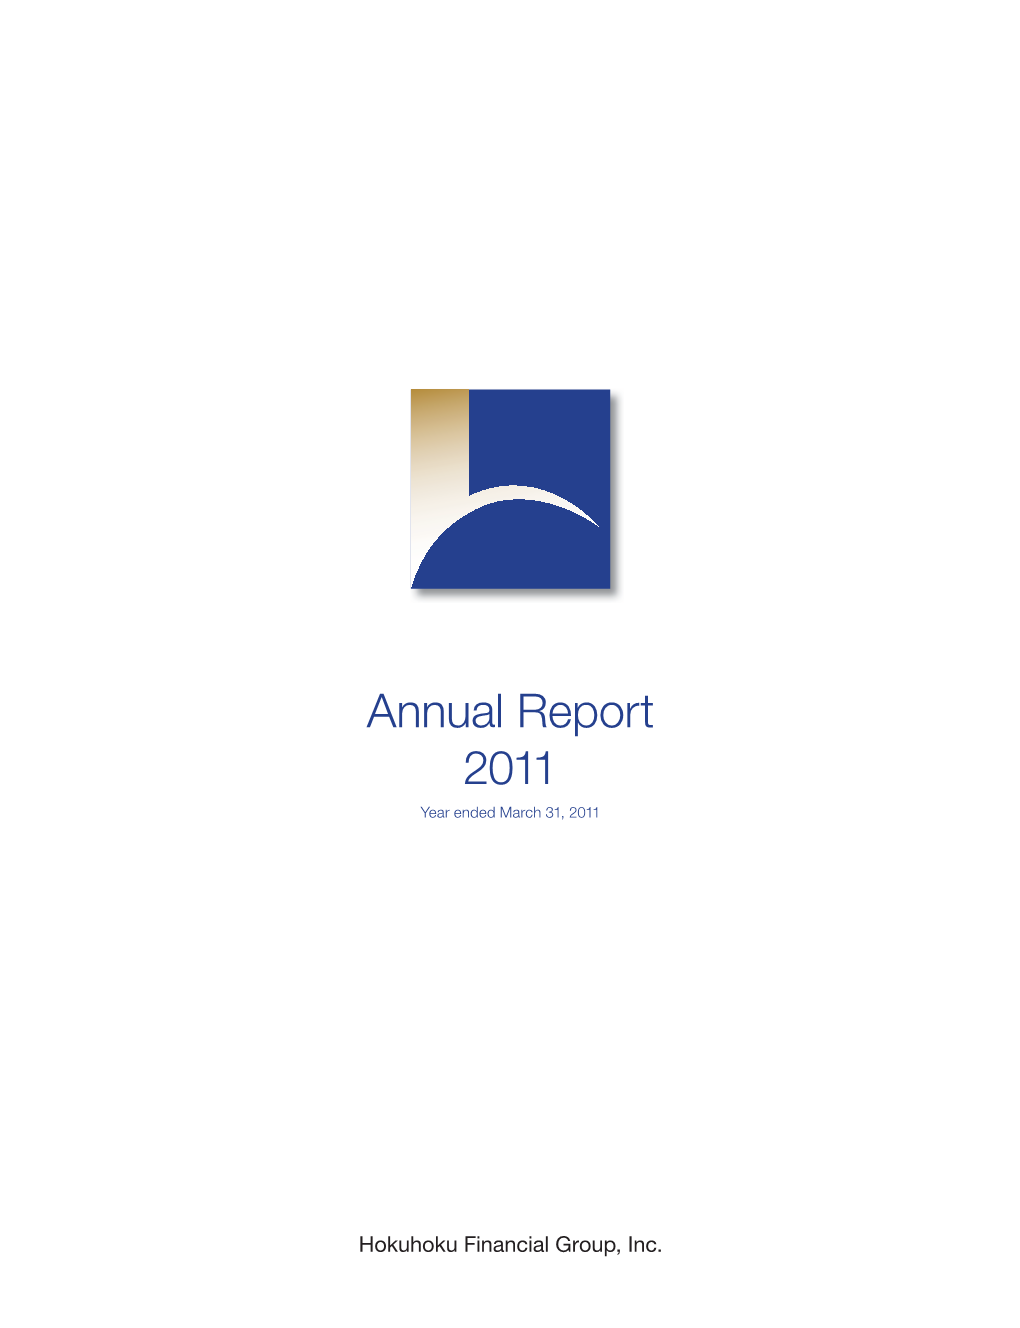 Annual Report 2011 Year Ended March 31, 2011